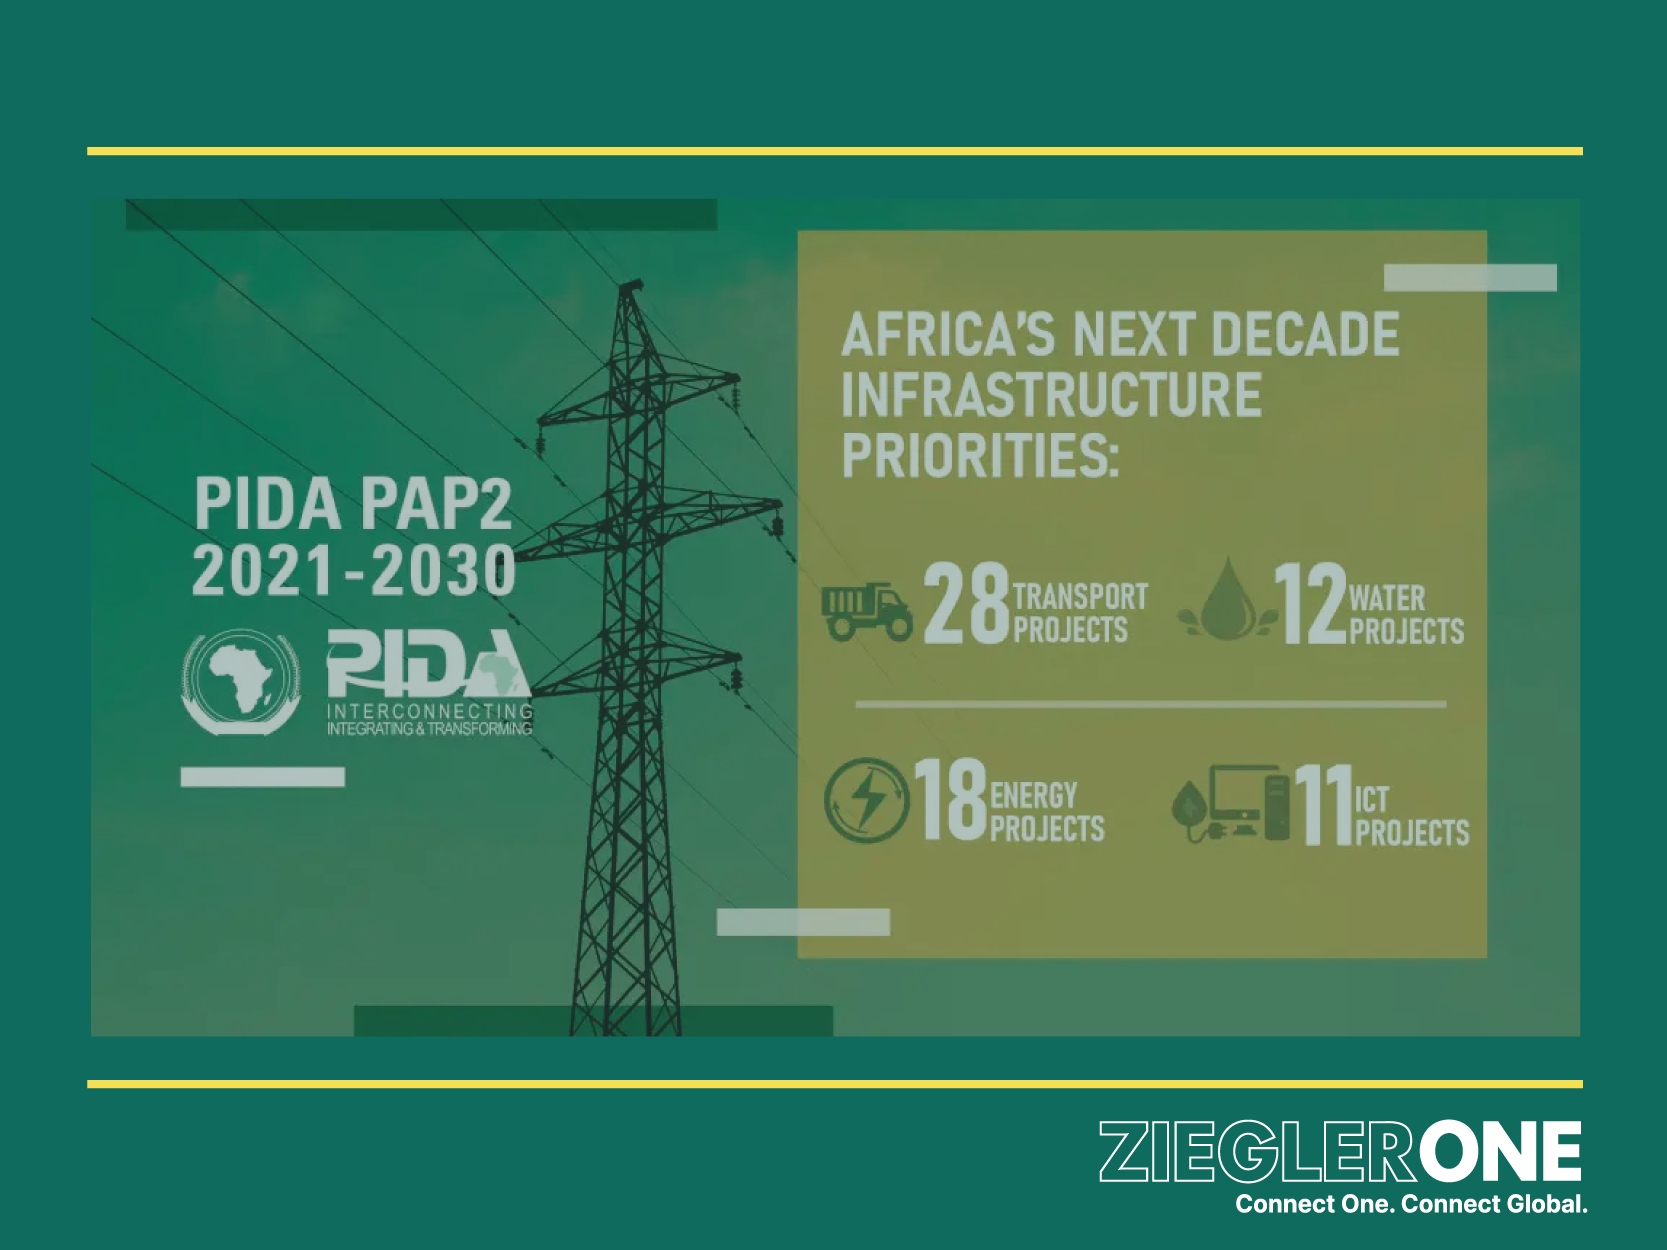 PIDA and PIDA-PAP 2 - African ministers' pledge